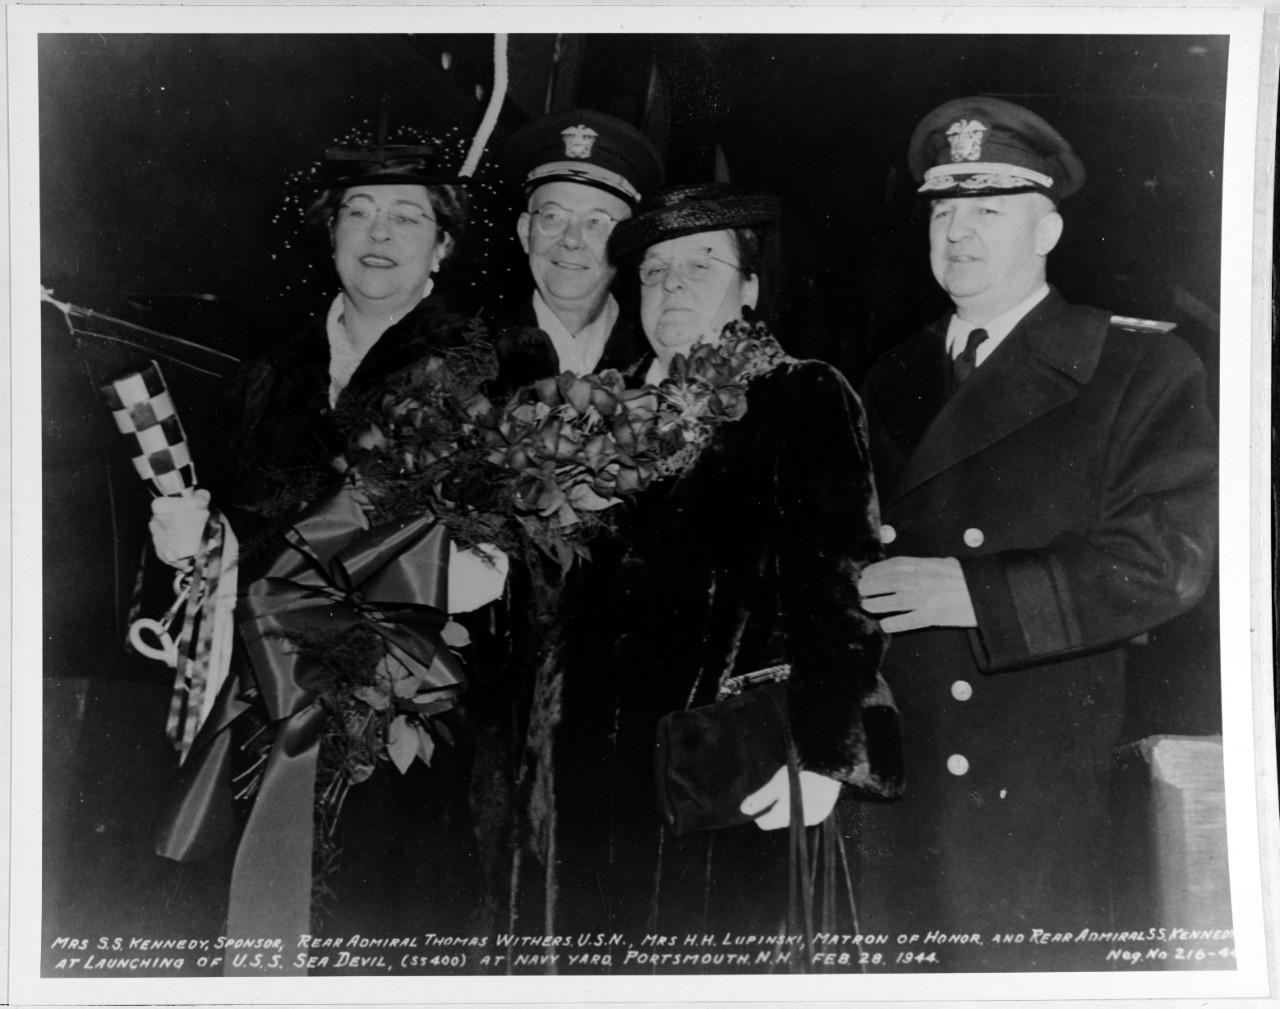 Mrs. S.S. Kennedy, Sponsor; Rear Admiral Thomas Withers, USN; Mrs. H.H. Lupinski, Matron of Honor; and Rear Admiral S.S. Kennedy, USN